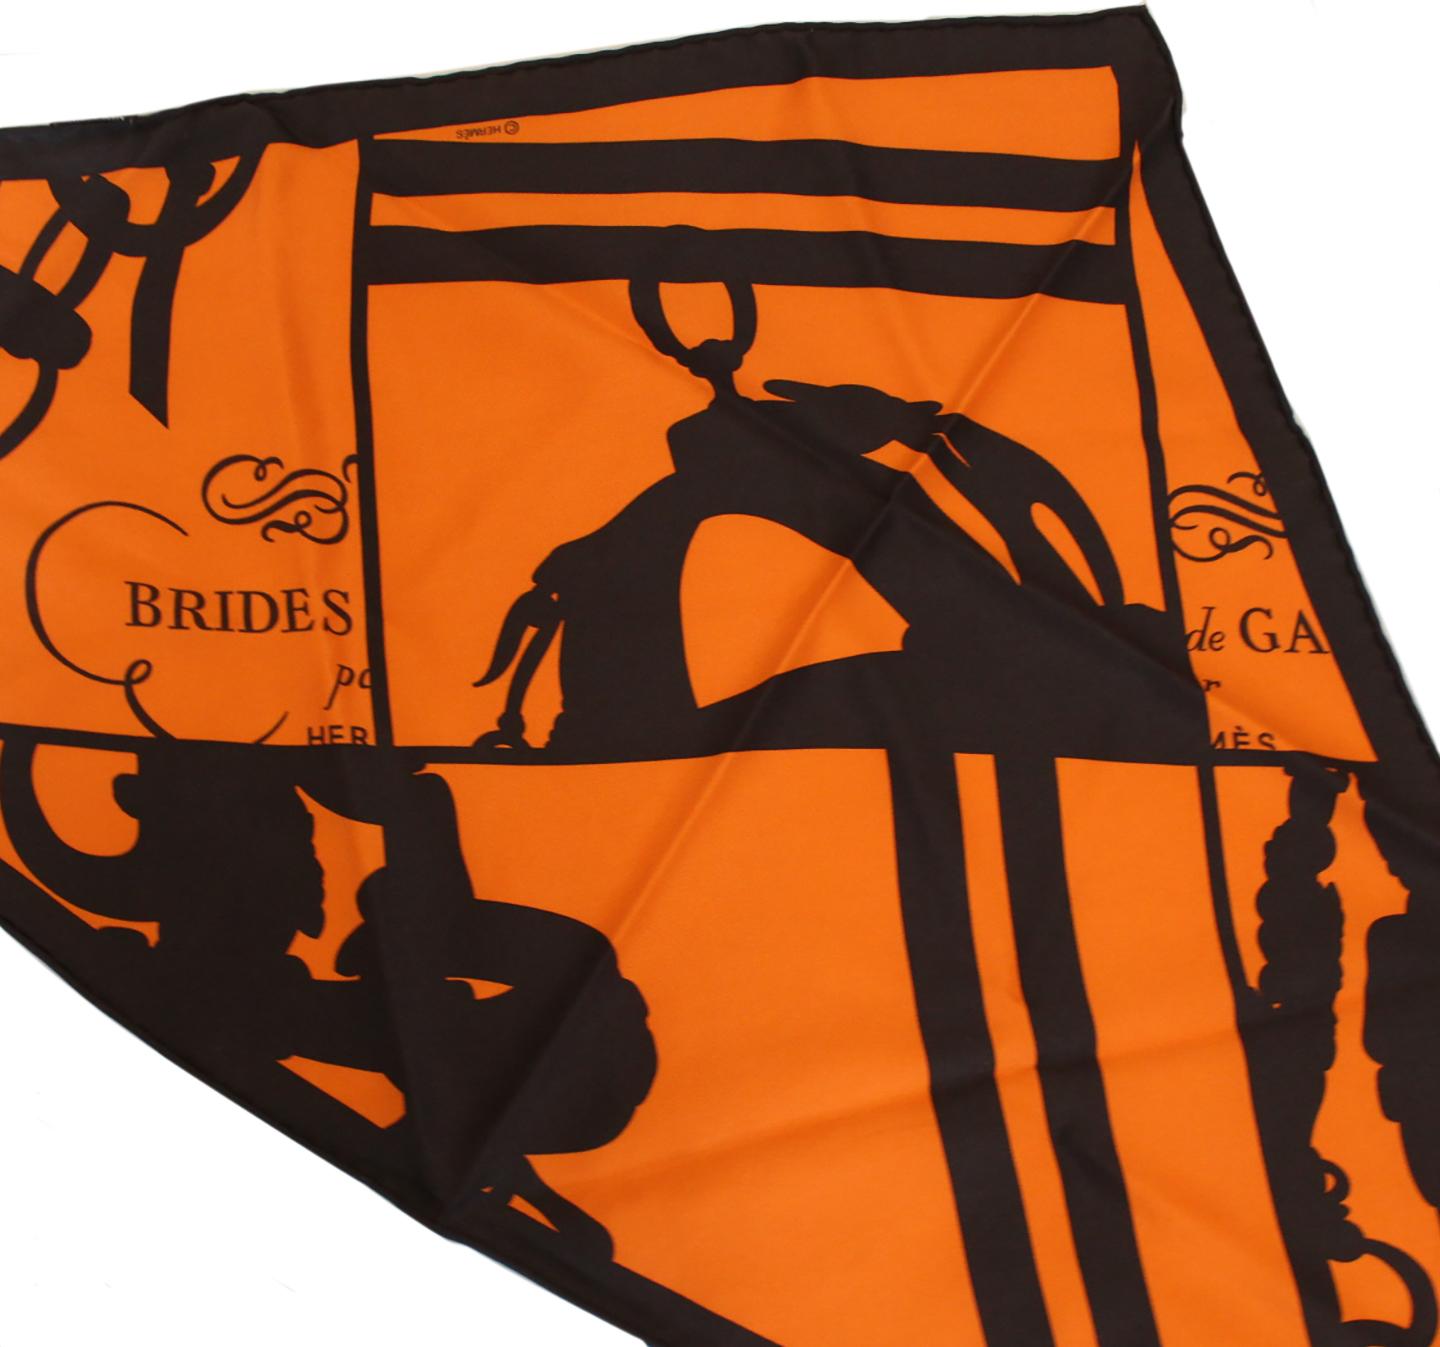 Hermes silk Pointu triangle Brides de Gala scarf  that can be worn around the neck or attached to your bag for that added glamour.  This is a wonderful Hermes silk scarf that any Hermes connoisseur would be pleased to have in their collection. It